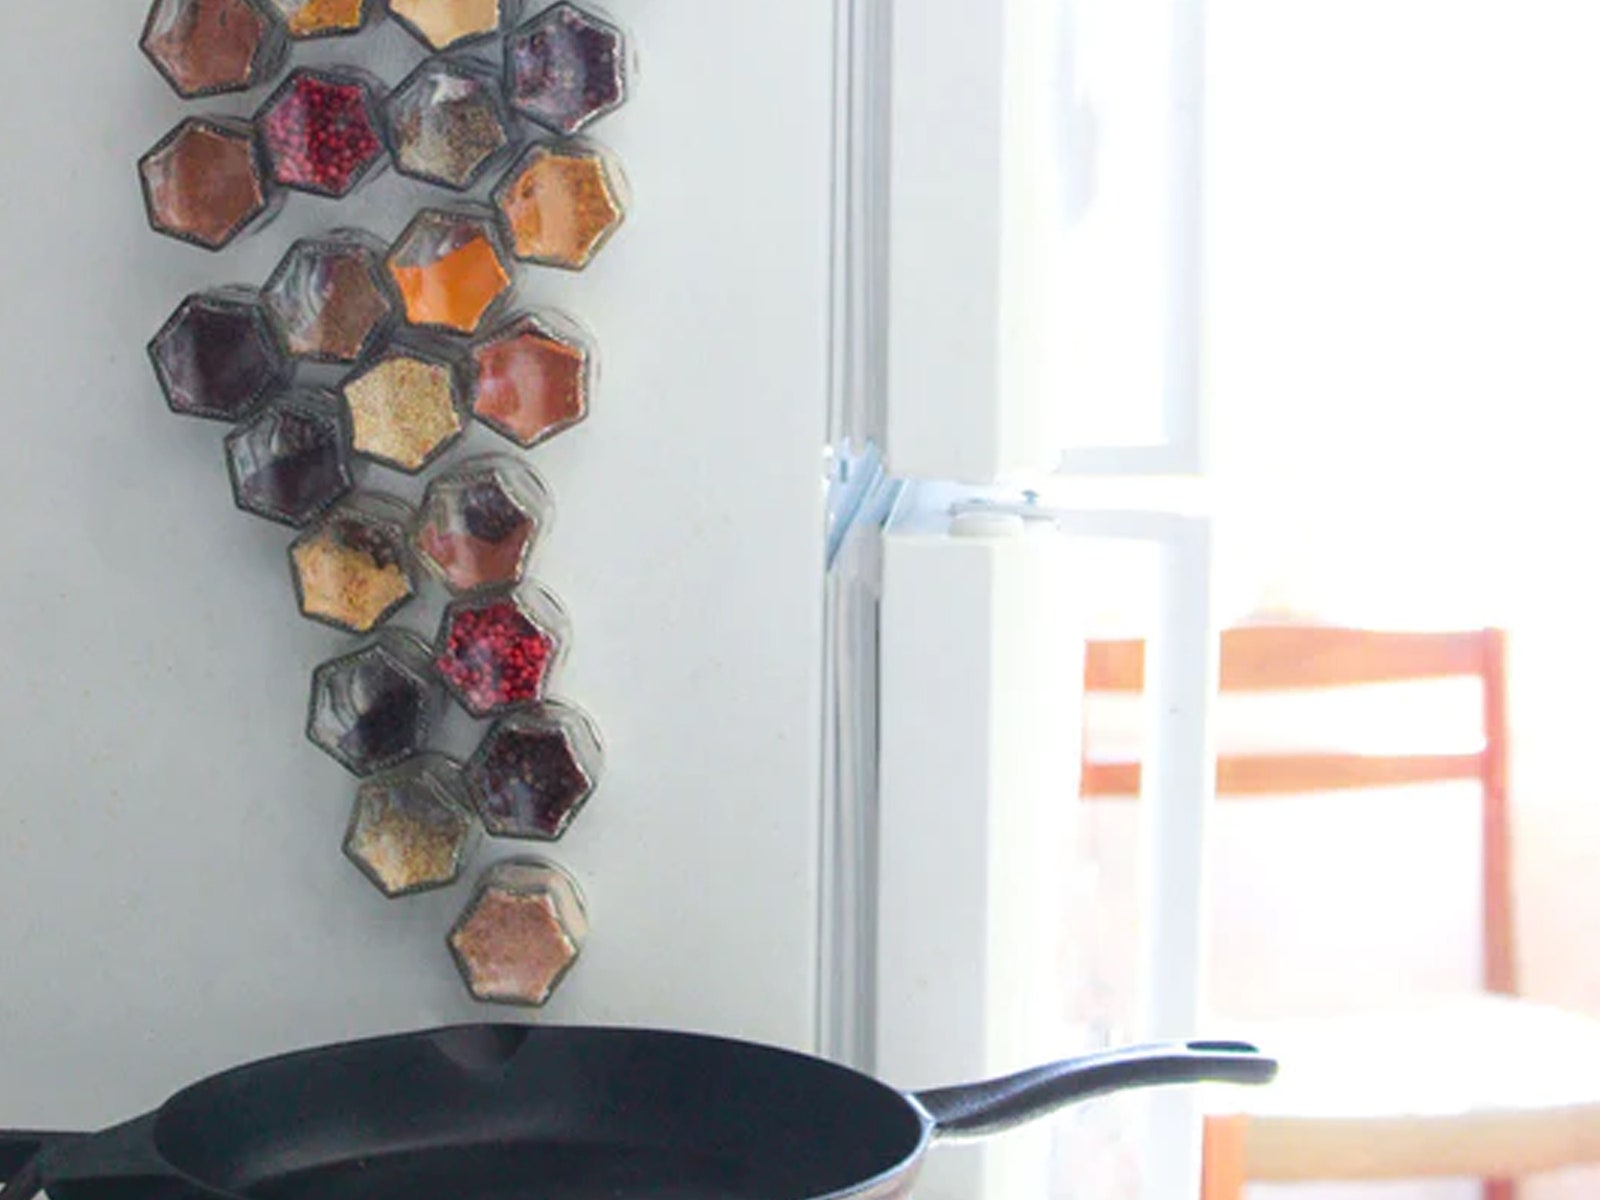 Clear hexagonal spice jars magnetically sticking to the side of a white fridge with a frying pan in immediate view